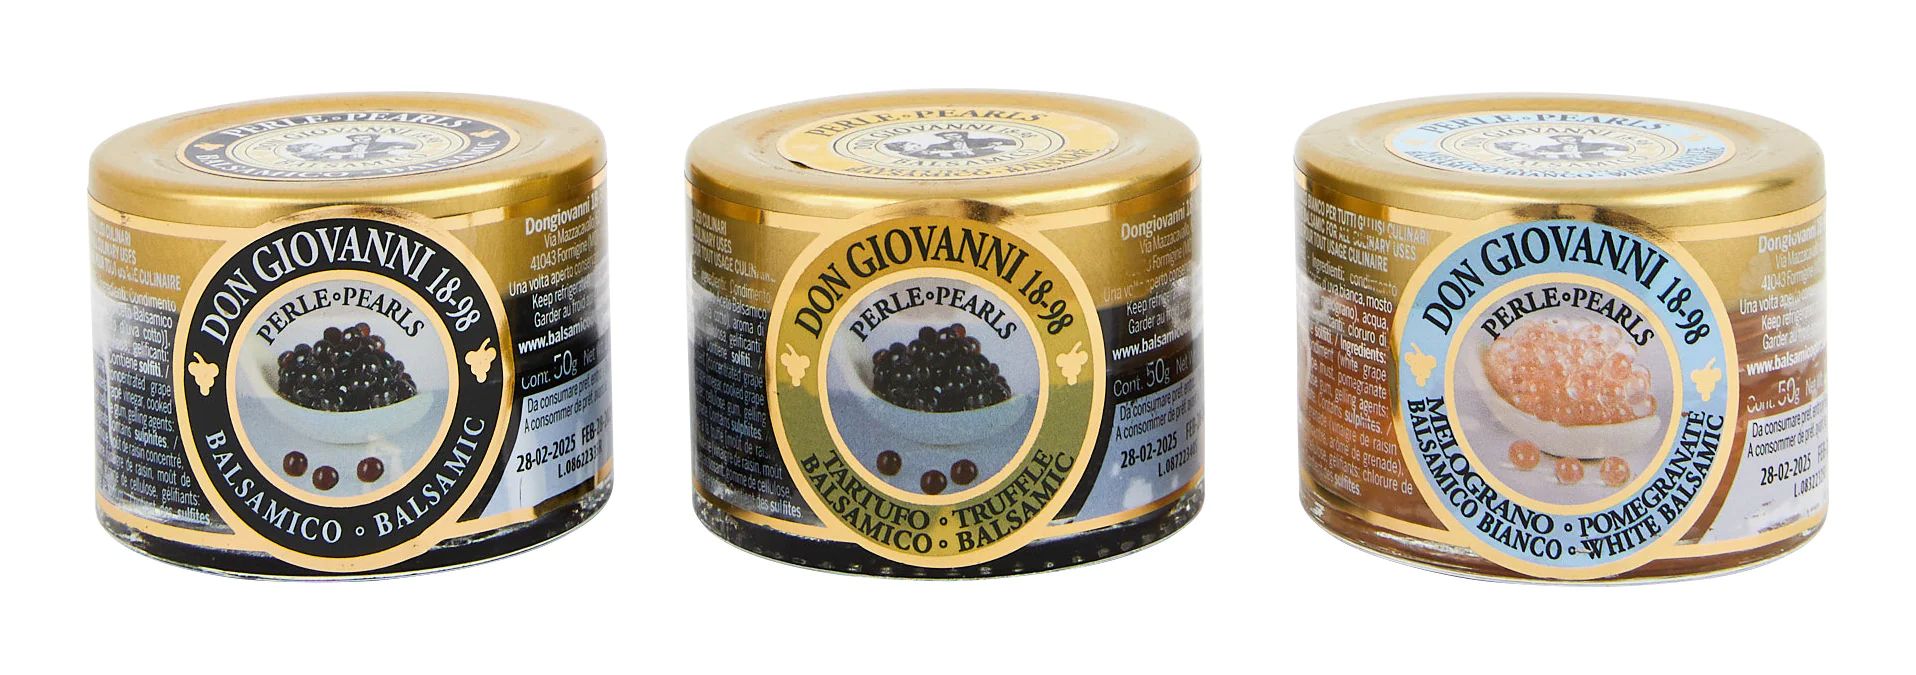 Don Giovanni Balsamic Pearls | Jayson Home